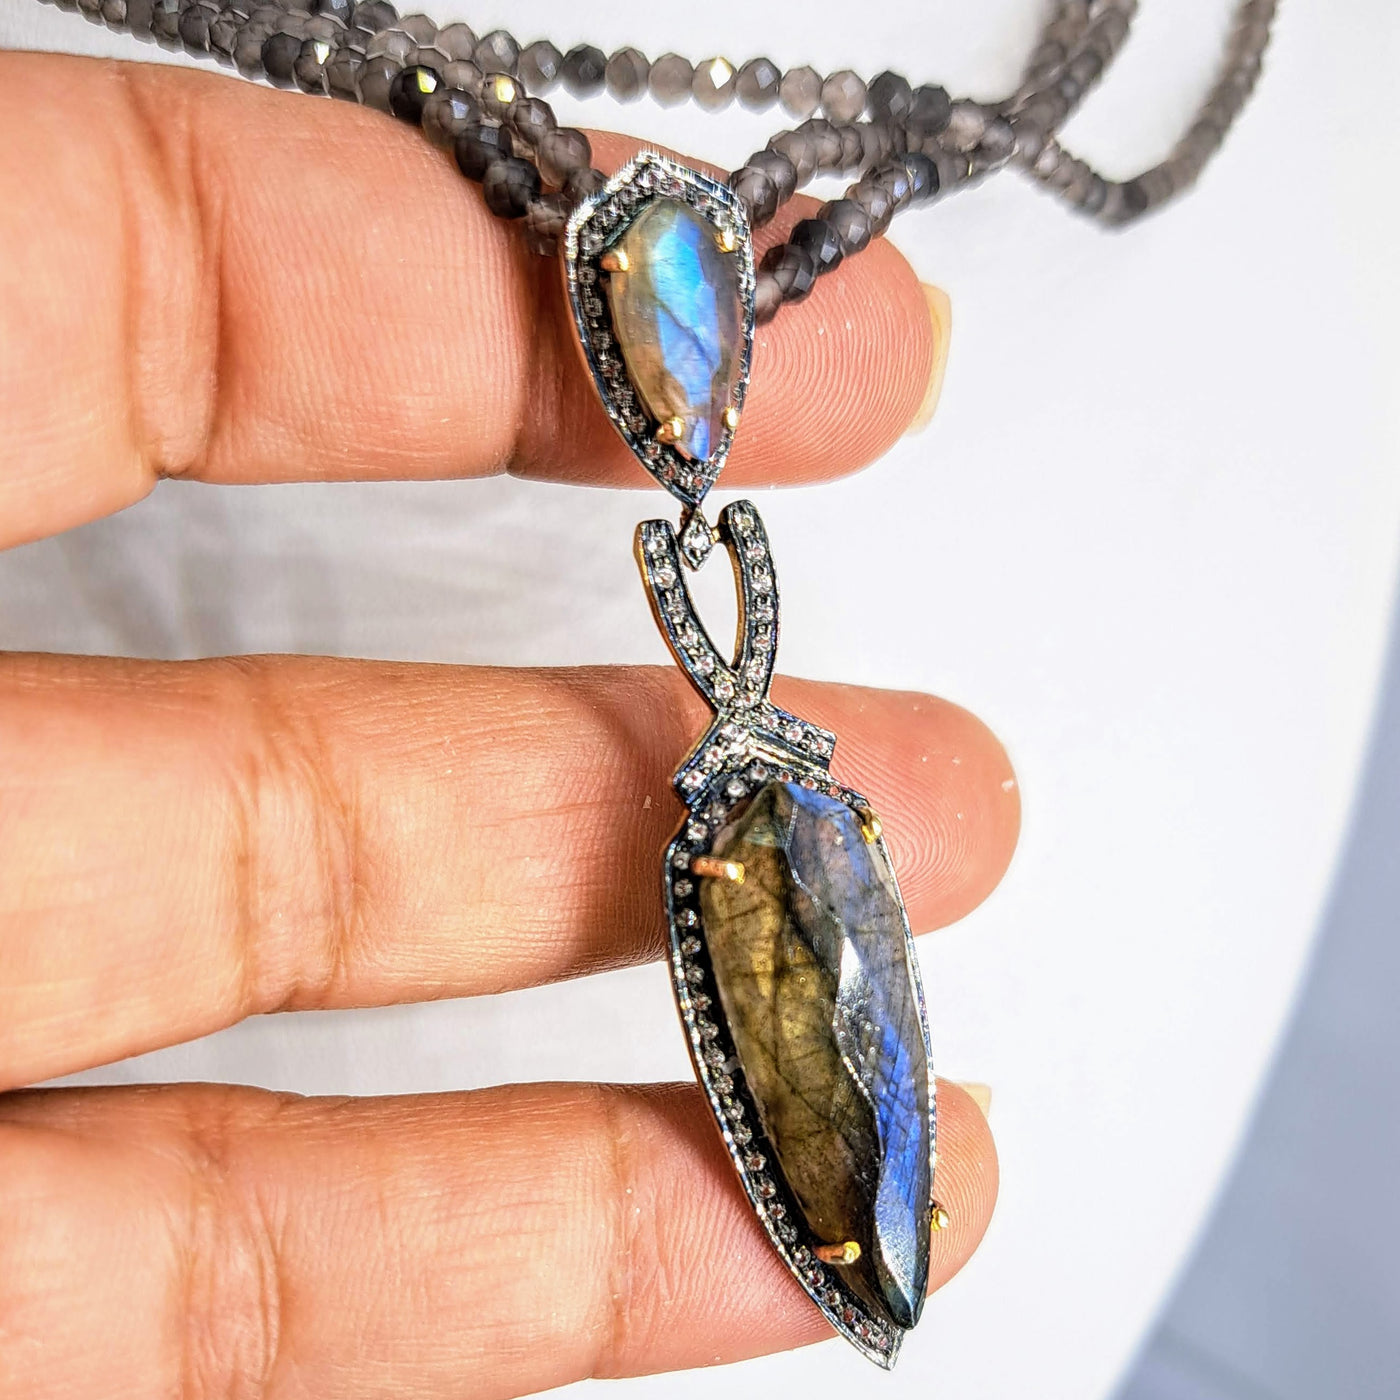 "Mid Summer Night's Dream" 16"-18" Necklace, by Barb - Labradorite, White Topaz, Agate, Sterling with Gold & Black Rhodium Accents